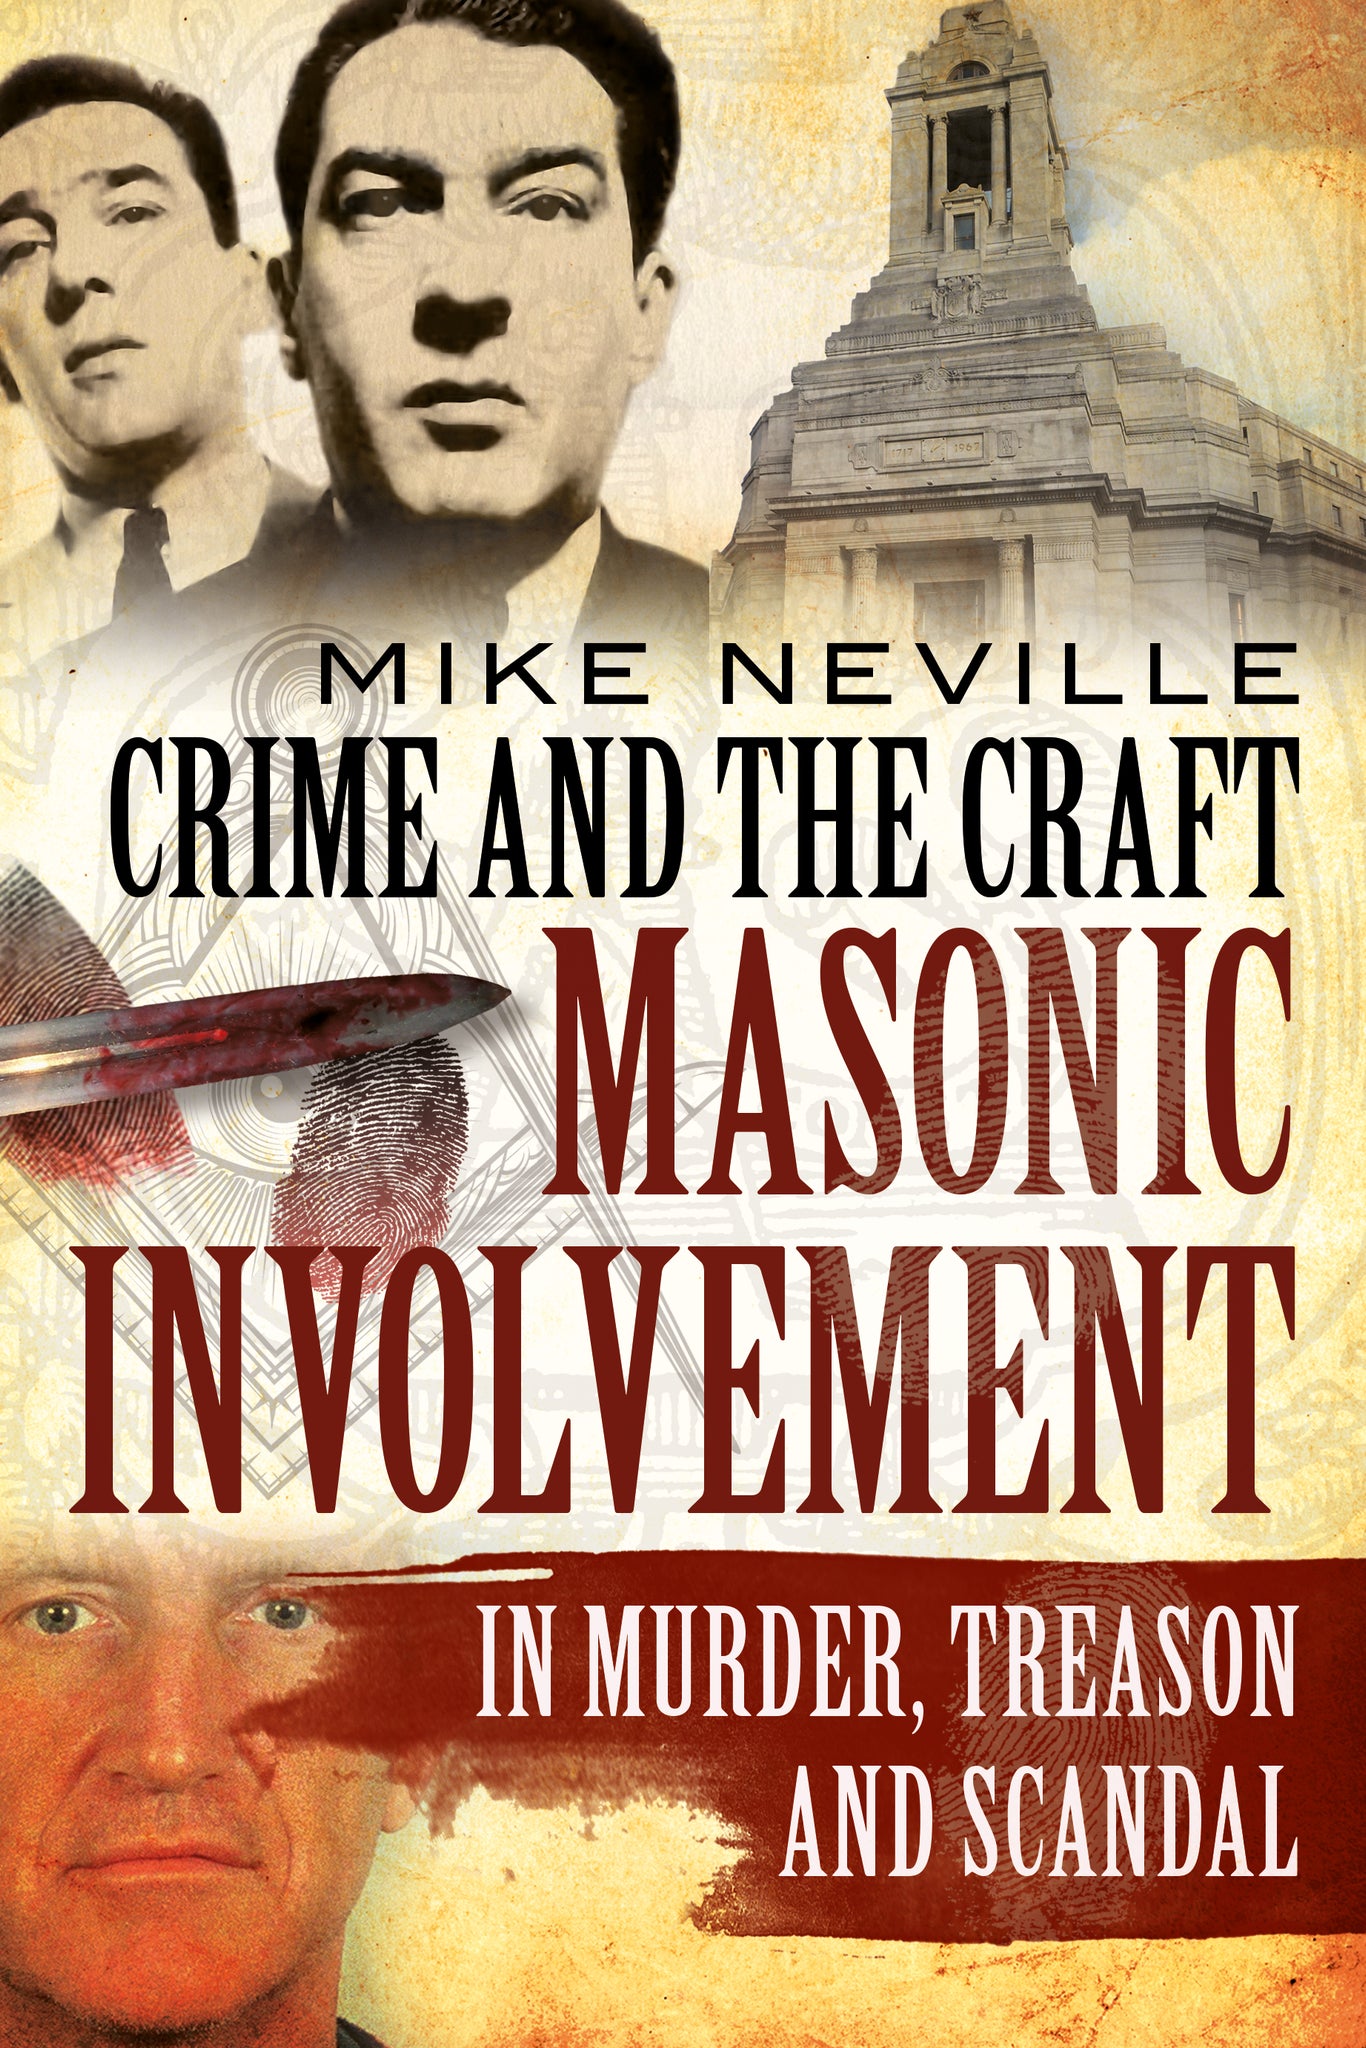 Crime and the Craft: Masonic Involvement in Murder, Treason and Scandal - published by Fonthill Media